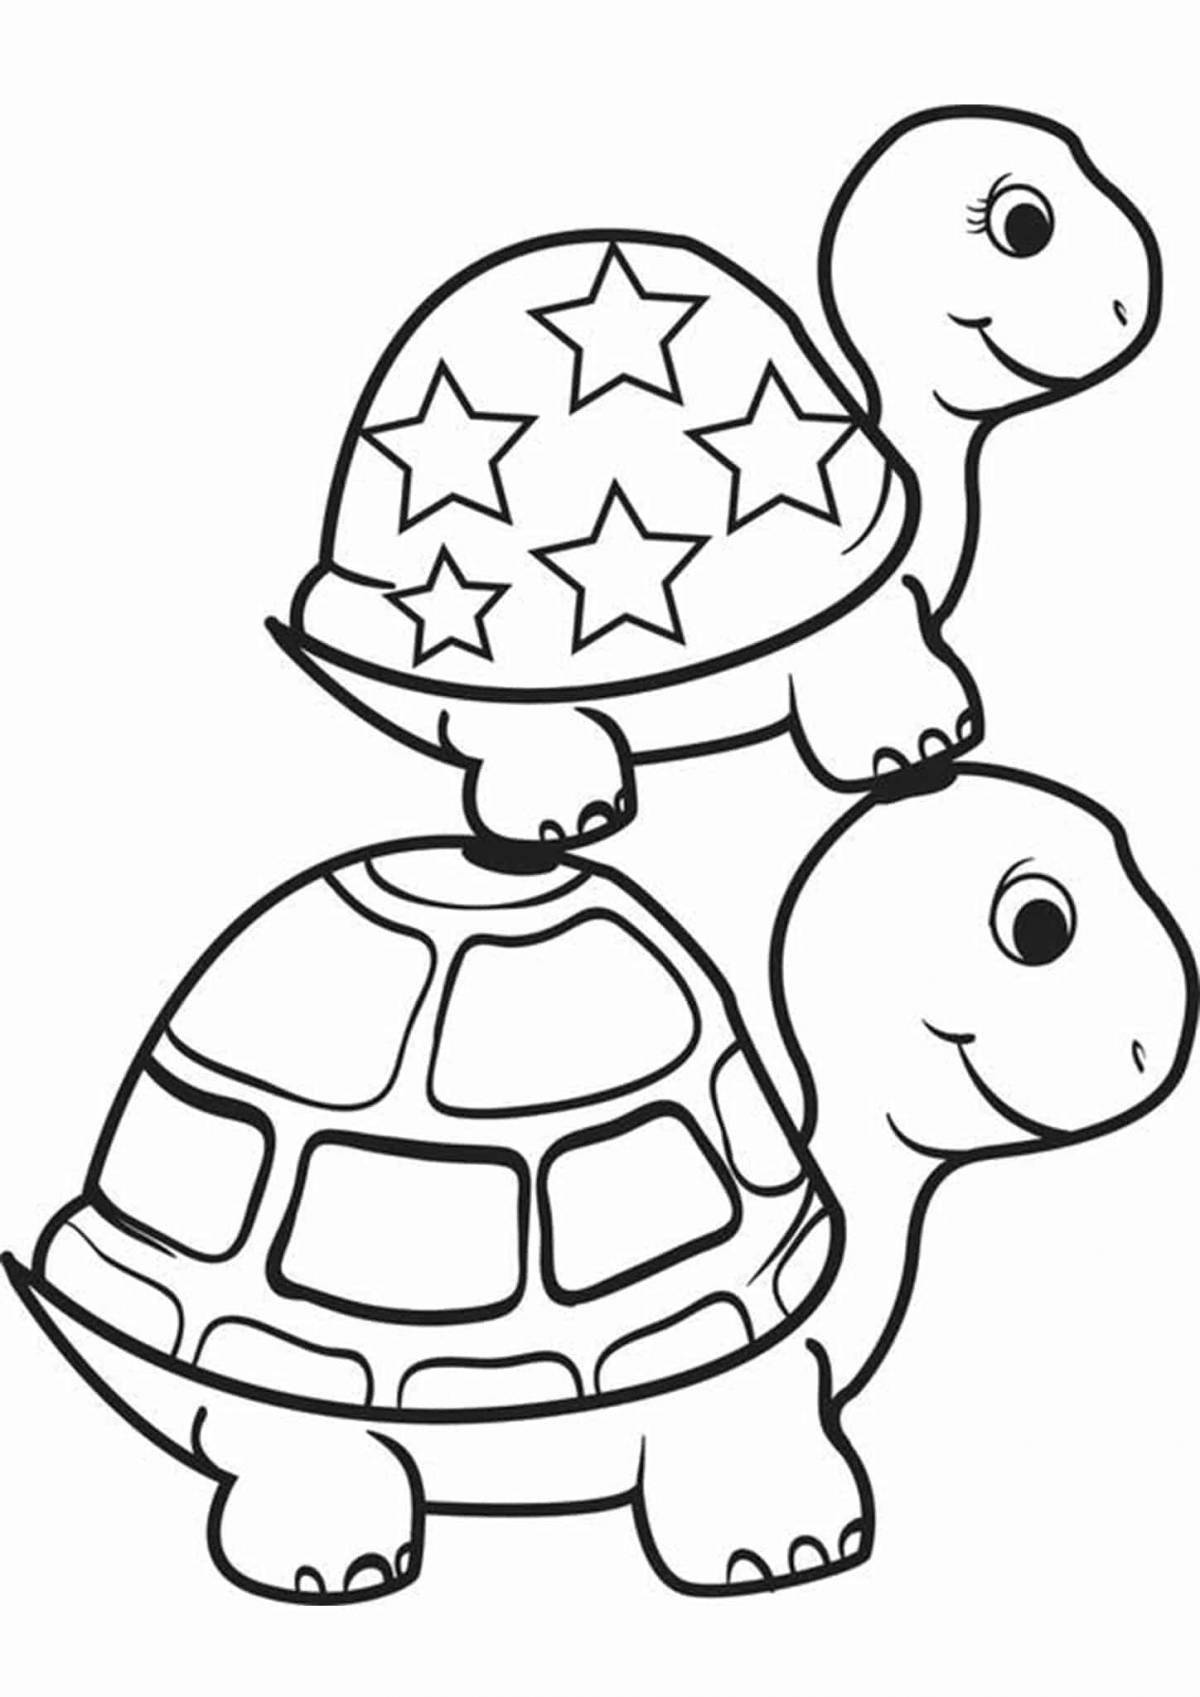 Creative turtle coloring book for 6-7 year olds